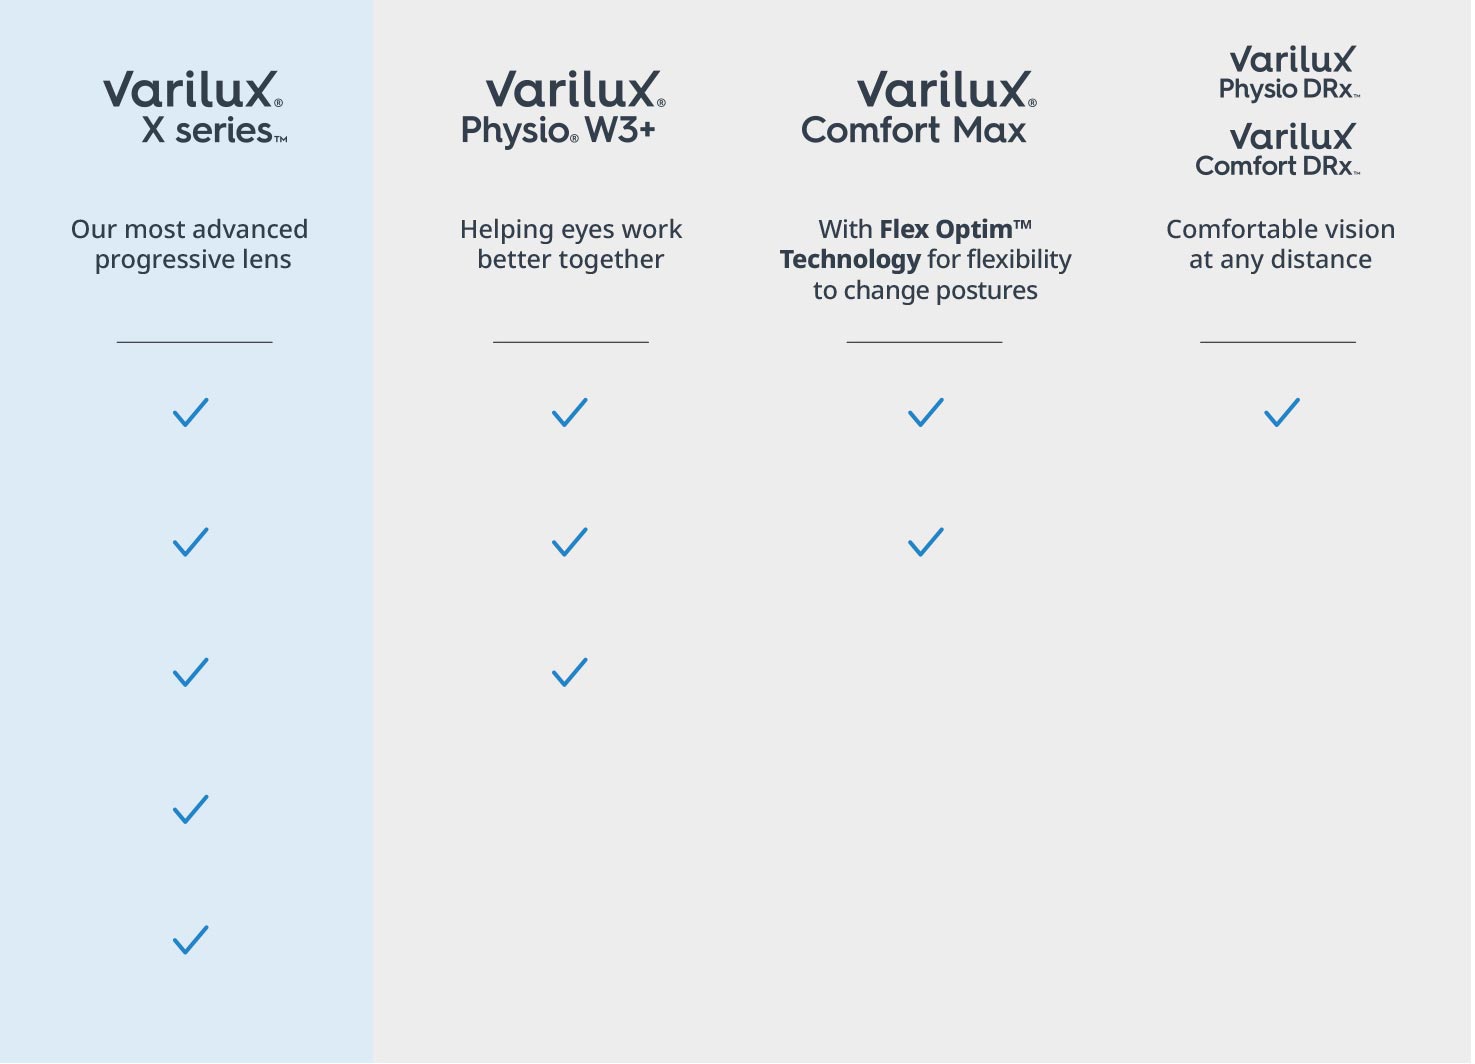 Varilux X Series - our most advanced progressive lens. Varilux Physio W3+ - helping eyes work better together. Varilux Comfort Max - with Flex Optim Technology for flexibility to change postures. Varilux Physio DRx and Varilux Comfort DRx